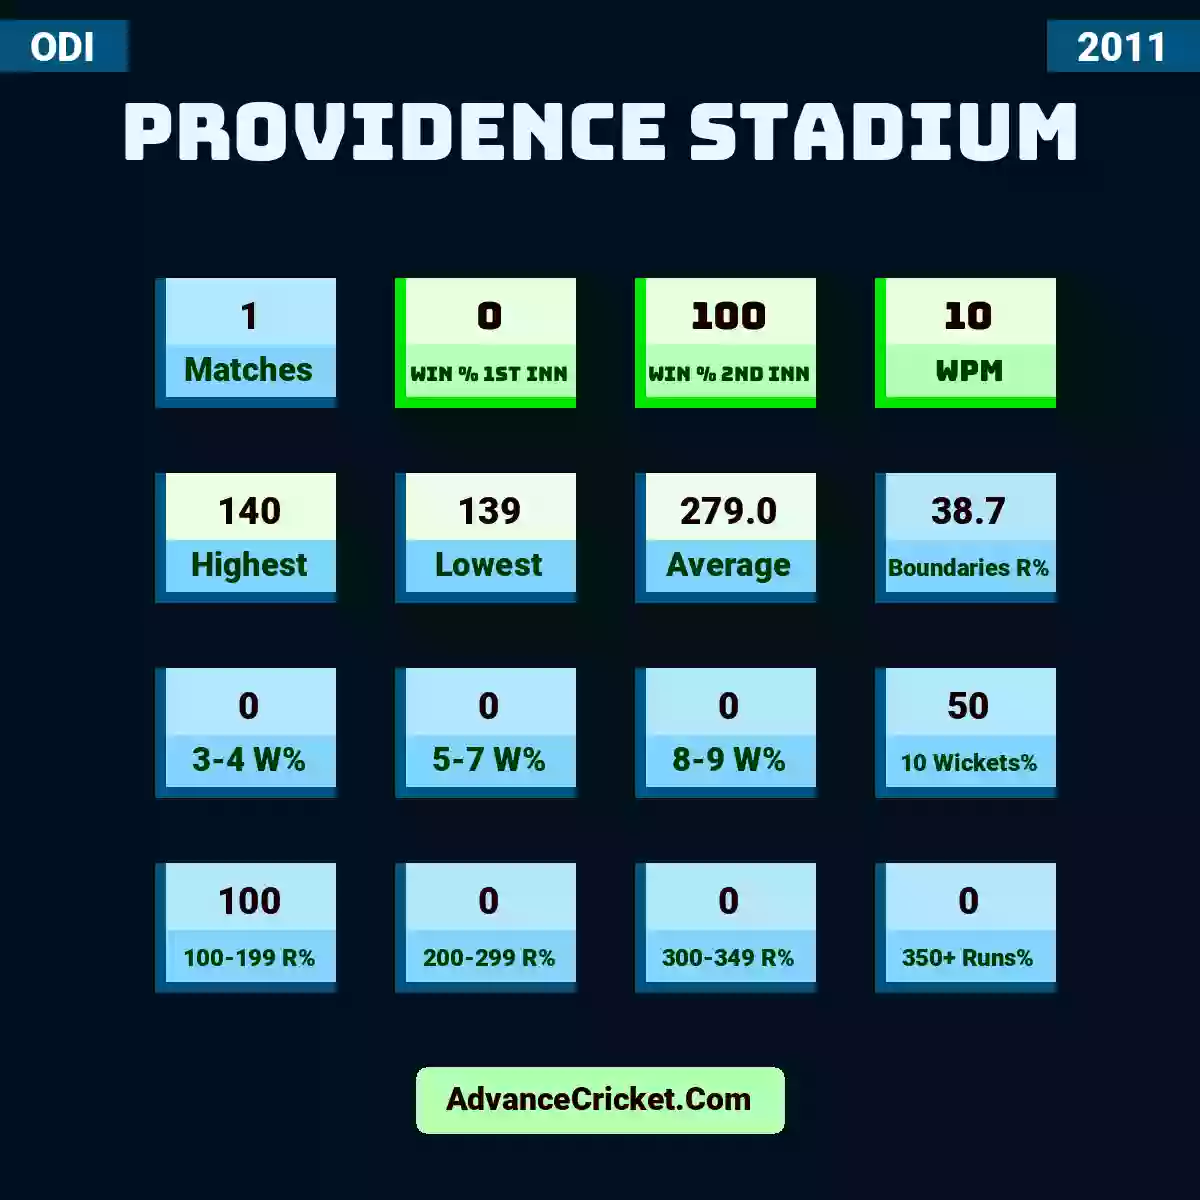 Image showing Providence Stadium with Matches: 1, Win % 1st Inn: 0, Win % 2nd Inn: 100, WPM: 10, Highest: 140, Lowest: 139, Average: 279.0, Boundaries R%: 38.7, 3-4 W%: 0, 5-7 W%: 0, 8-9 W%: 0, 10 Wickets%: 50, 100-199 R%: 100, 200-299 R%: 0, 300-349 R%: 0, 350+ Runs%: 0.